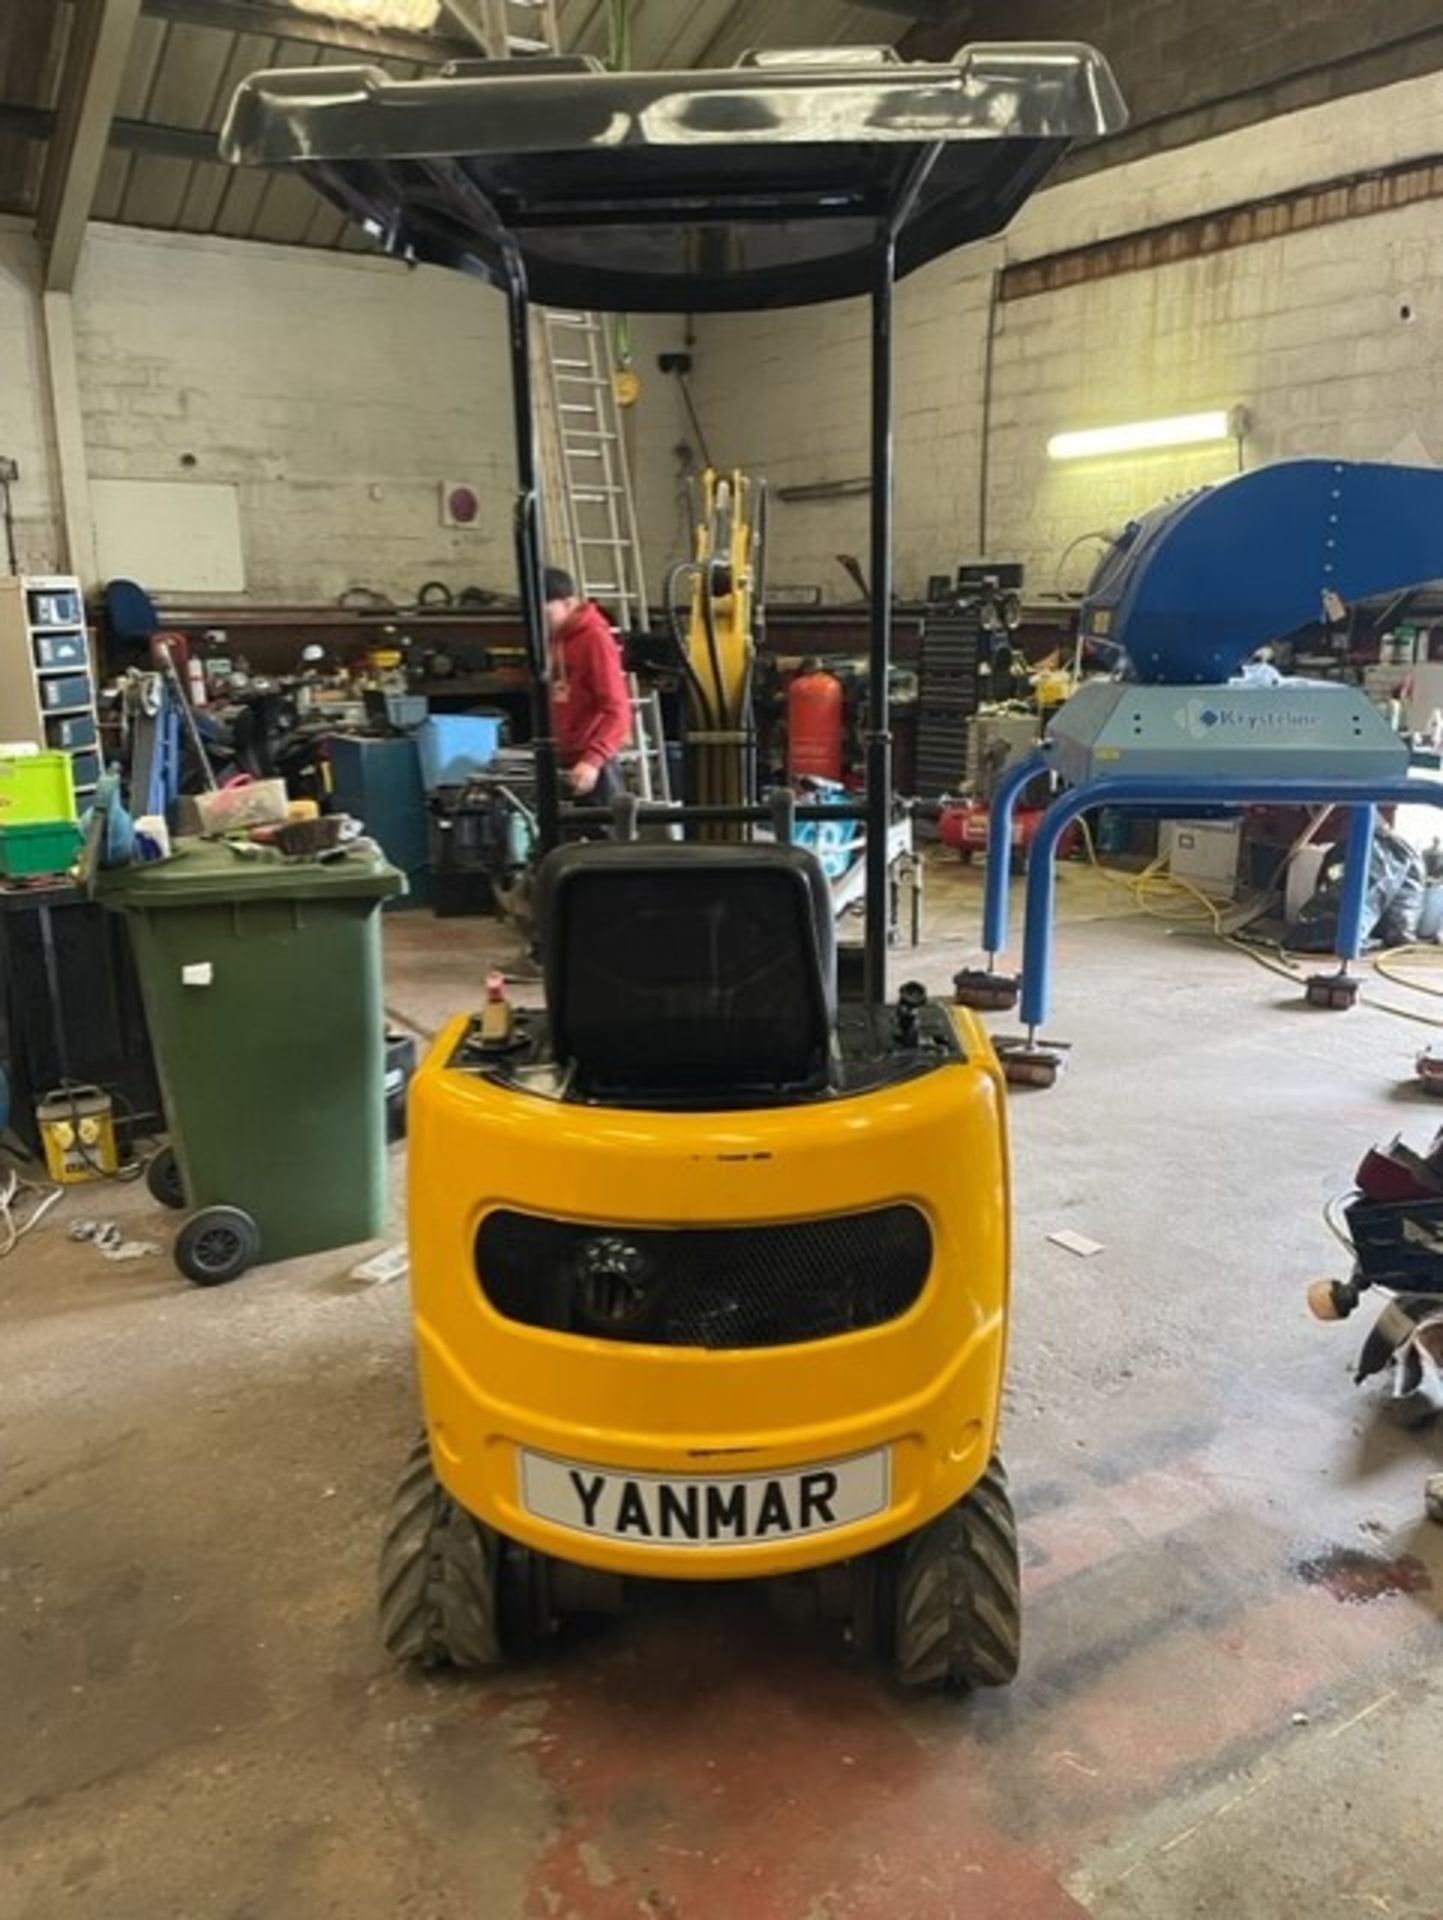 Rippa 1 ton excavator sweet little runner yanmar engine also hydraulics smooth for a little - Image 2 of 8